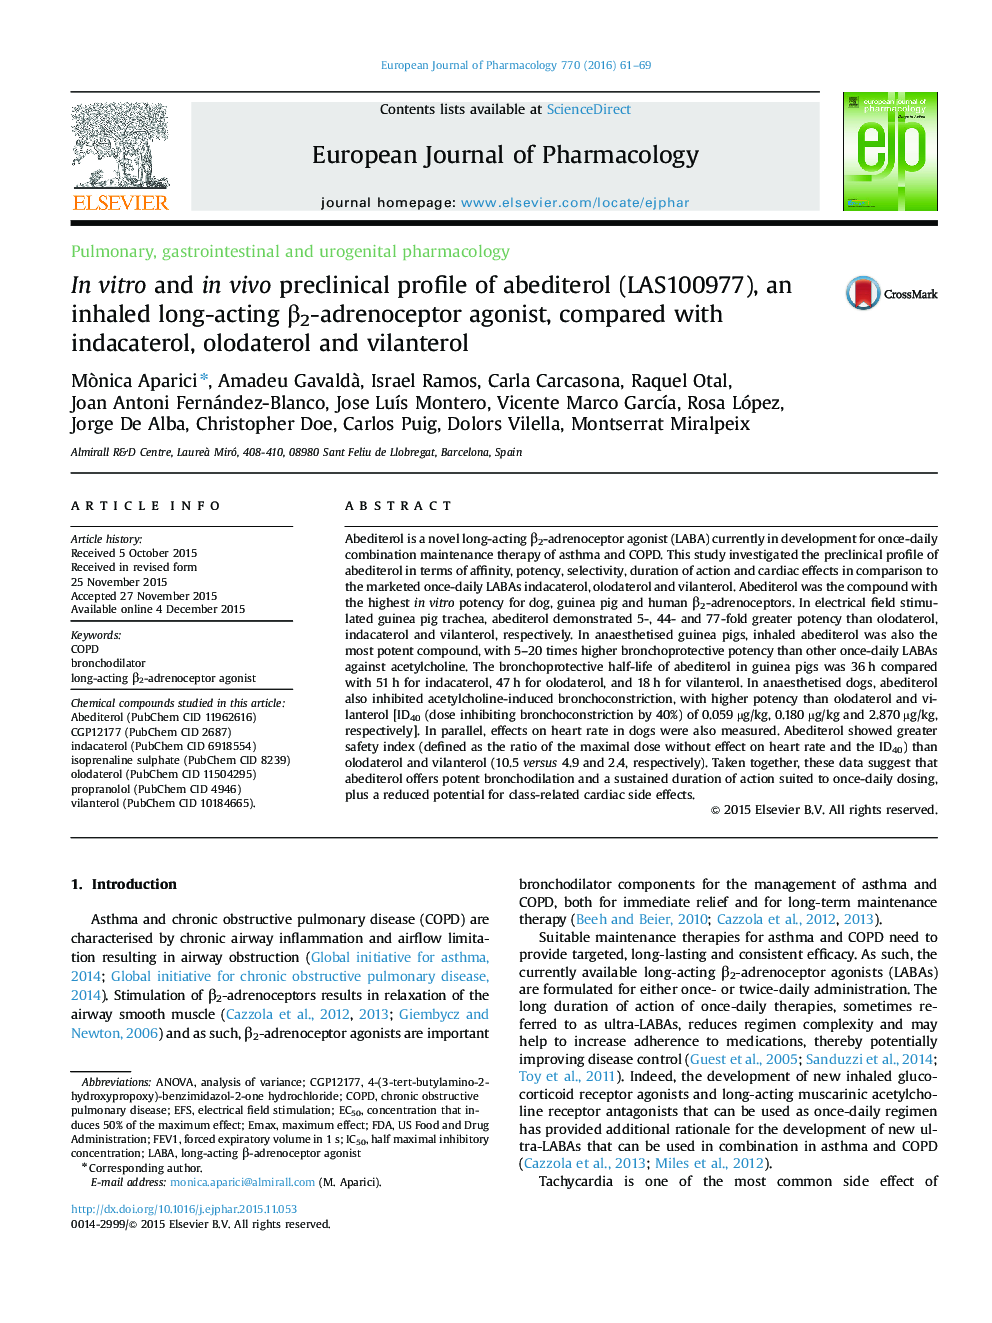 In vitro and in vivo preclinical profile of abediterol (LAS100977), an inhaled long-acting β2-adrenoceptor agonist, compared with indacaterol, olodaterol and vilanterol